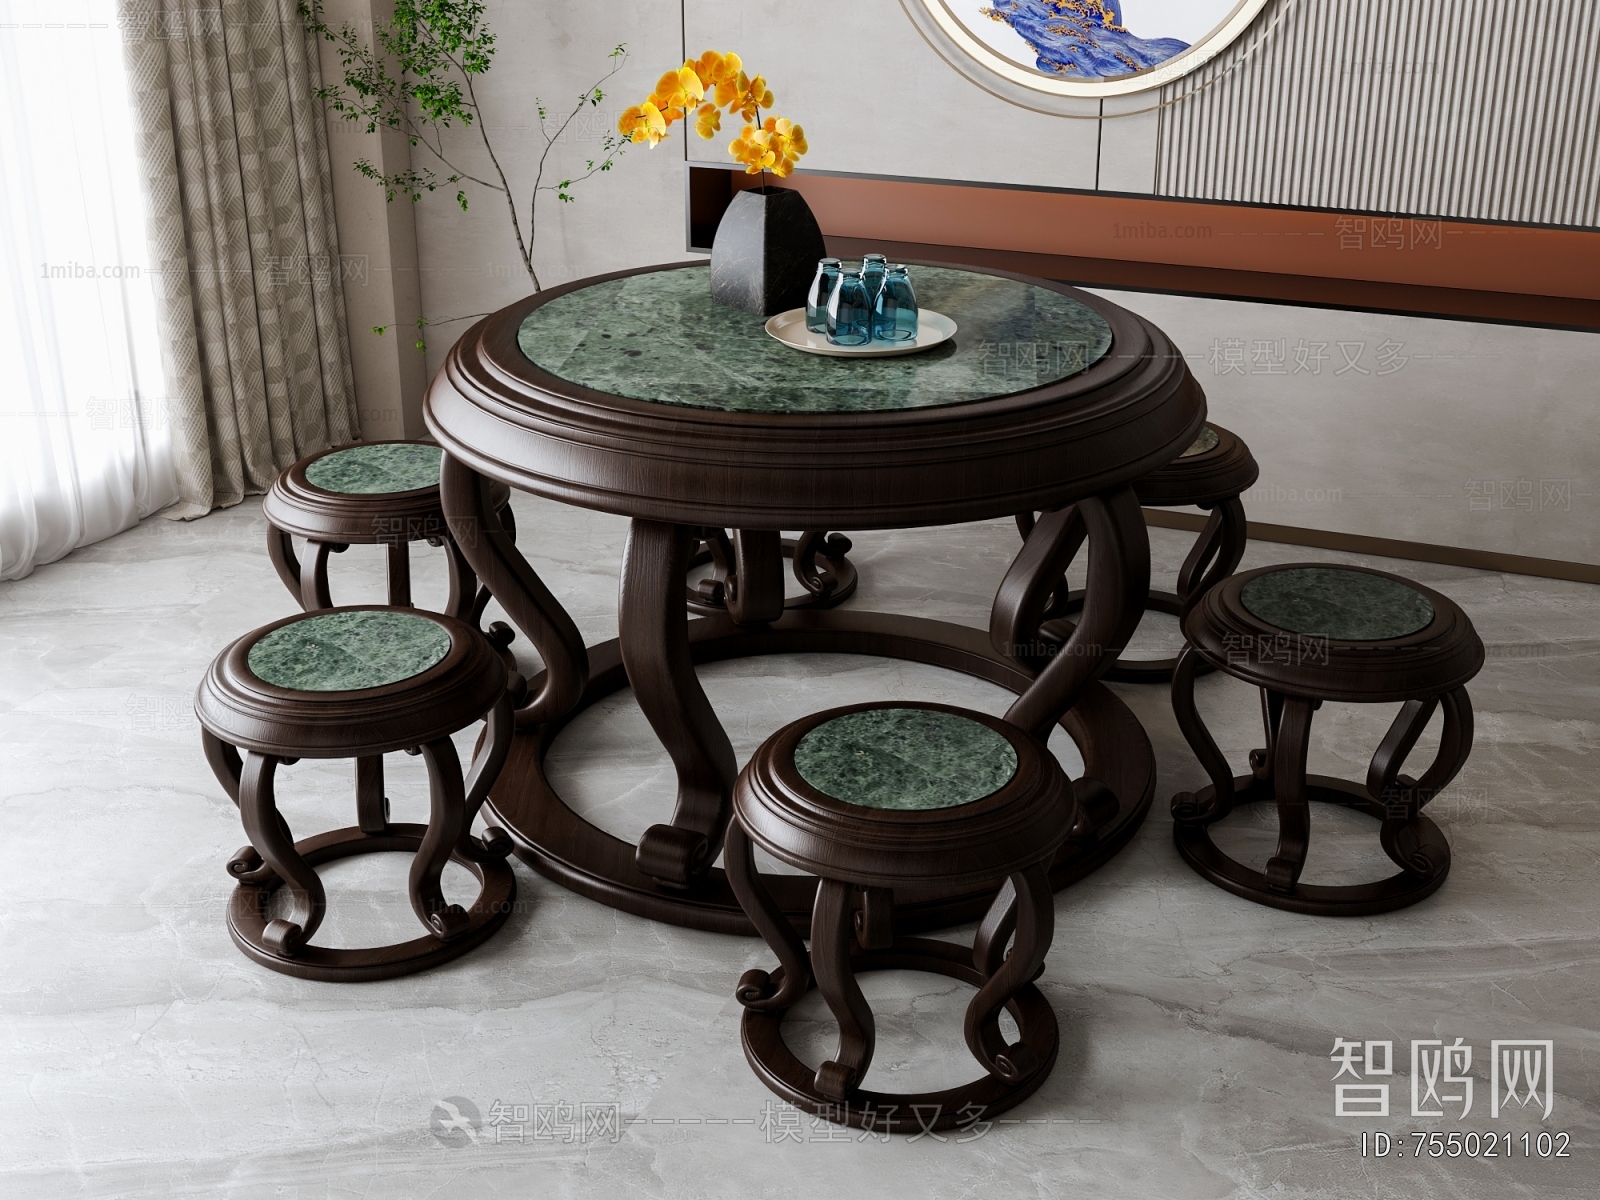 Classical Style Tea Tables And Chairs